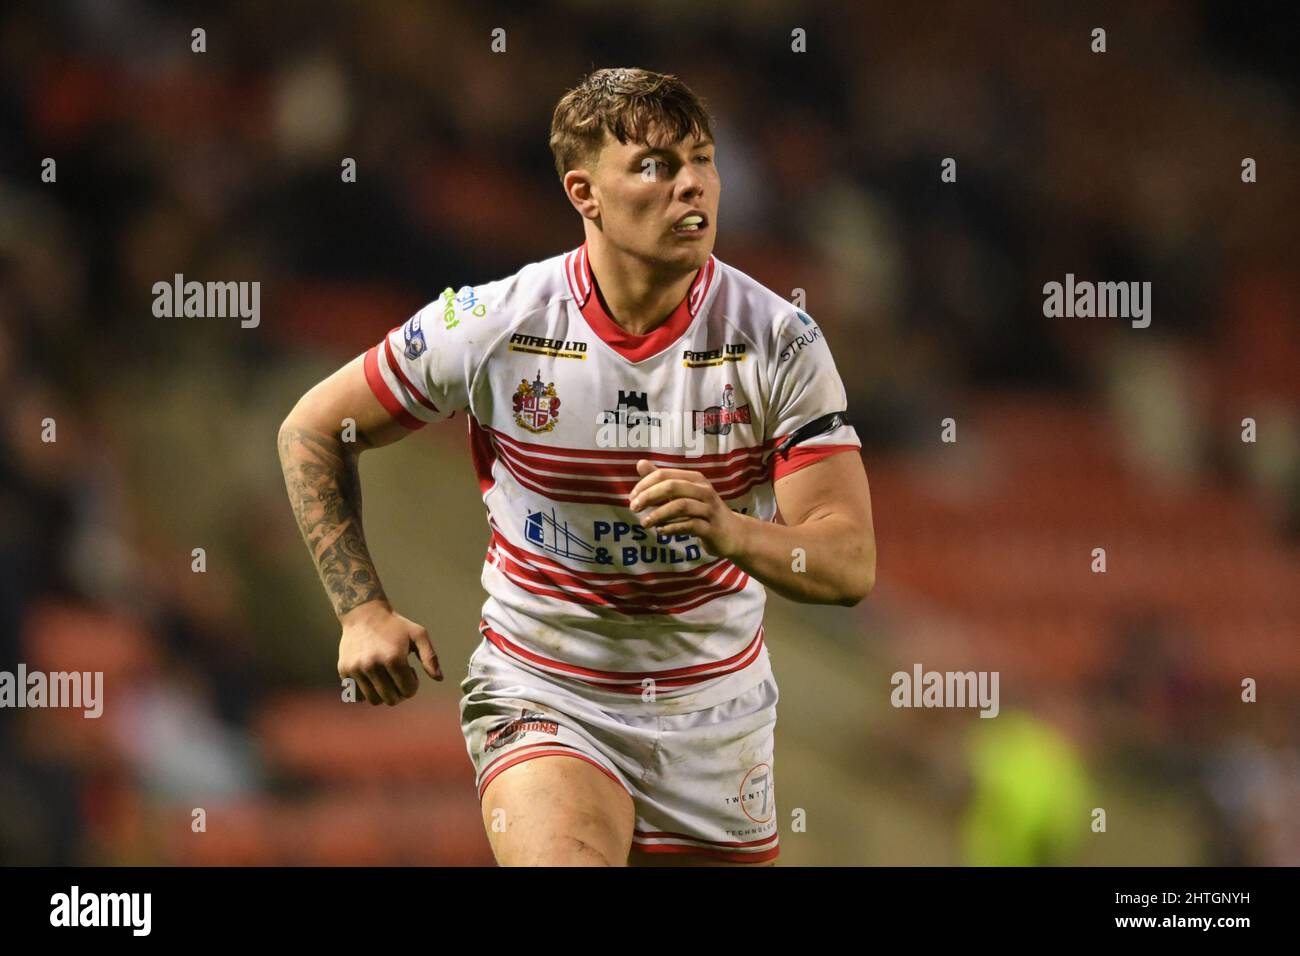 Keanan Brand #3 of Leigh Centurions in action during the game Stock Photo